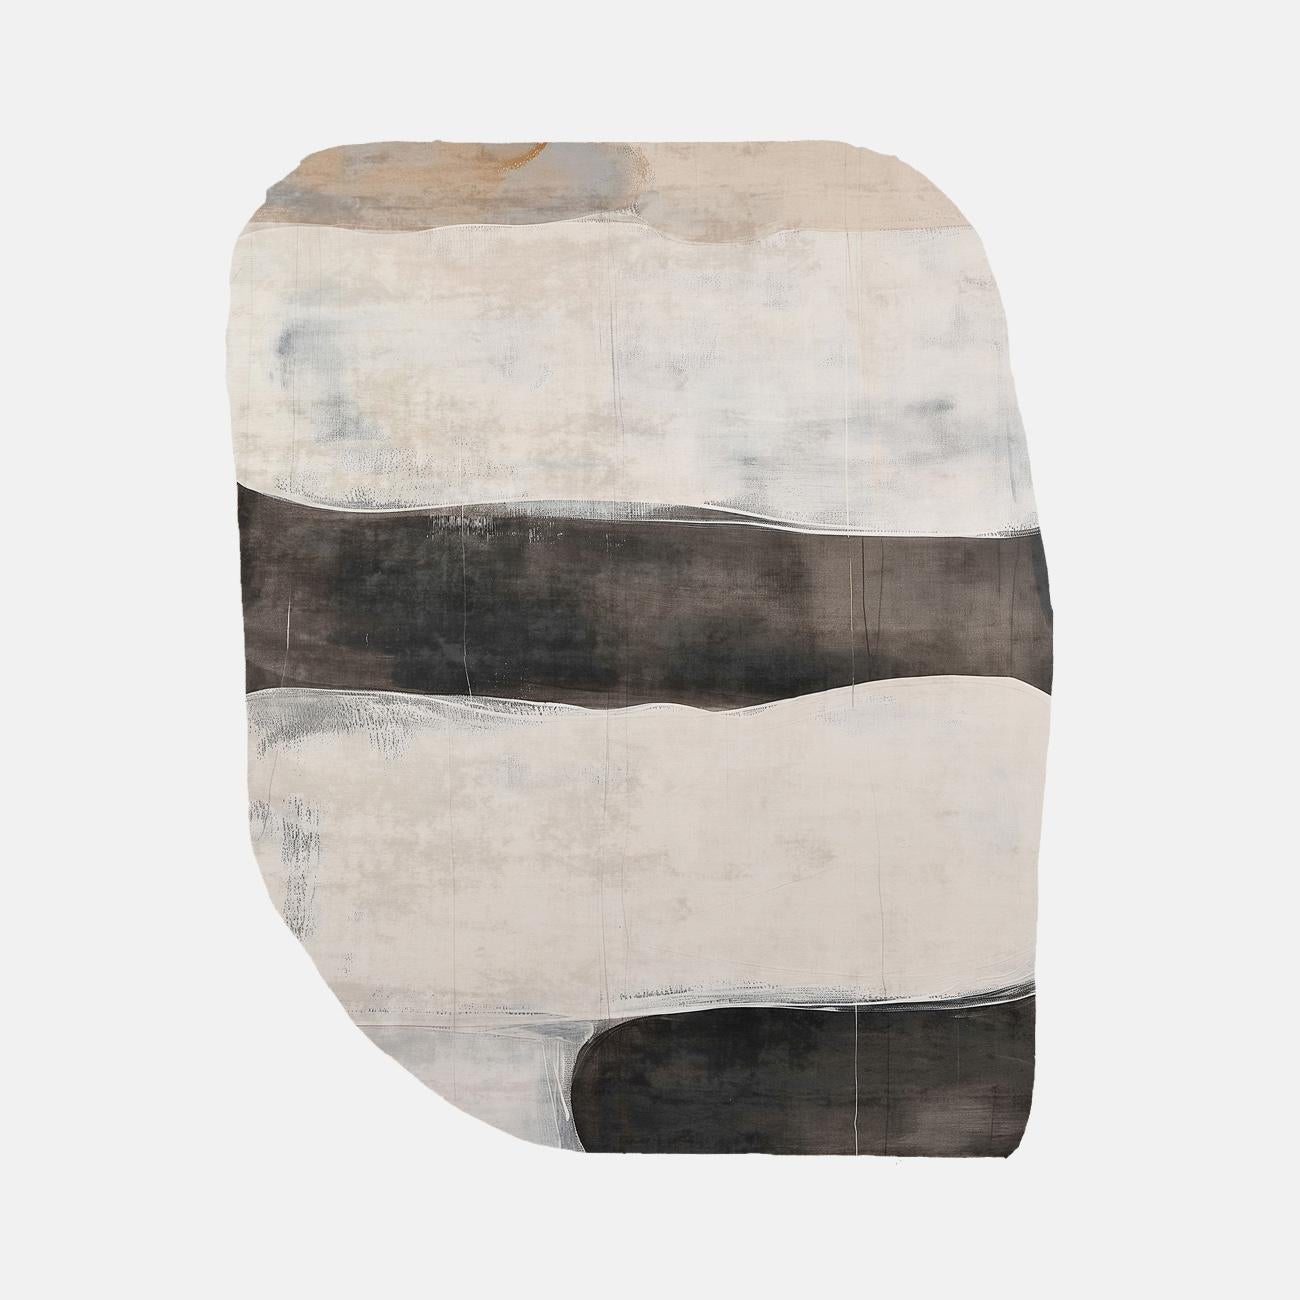 Impasse Girardon 1974 Passo Edit Rug by Atelier Bowy C.D.
Dimensions: W 243 x L 300 cm.
Materials: Wool, silk.

Available in W140 x L220, W170 x L240, W210 x L300, W230 x L300, W243 x L300 cm.

Atelier Bowy C.D. is dedicated to crafting contemporary